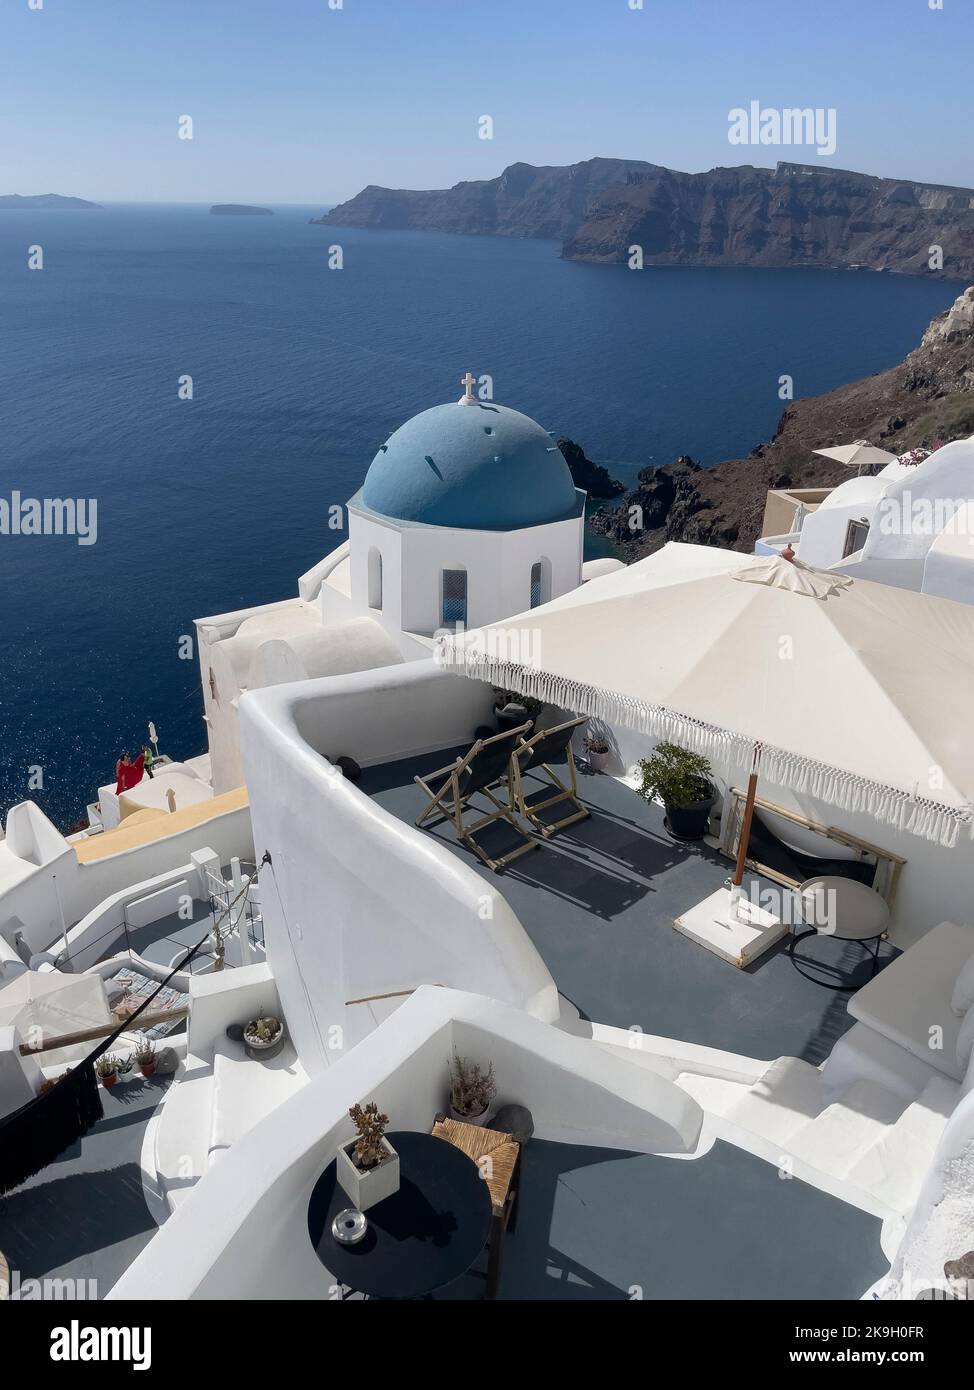 Oia, Santorini, Greece. 2022. Overview of famous blue domed buildings at Oia on the clifftops overlooking the Aegean Sea in Santorini Stock Photo